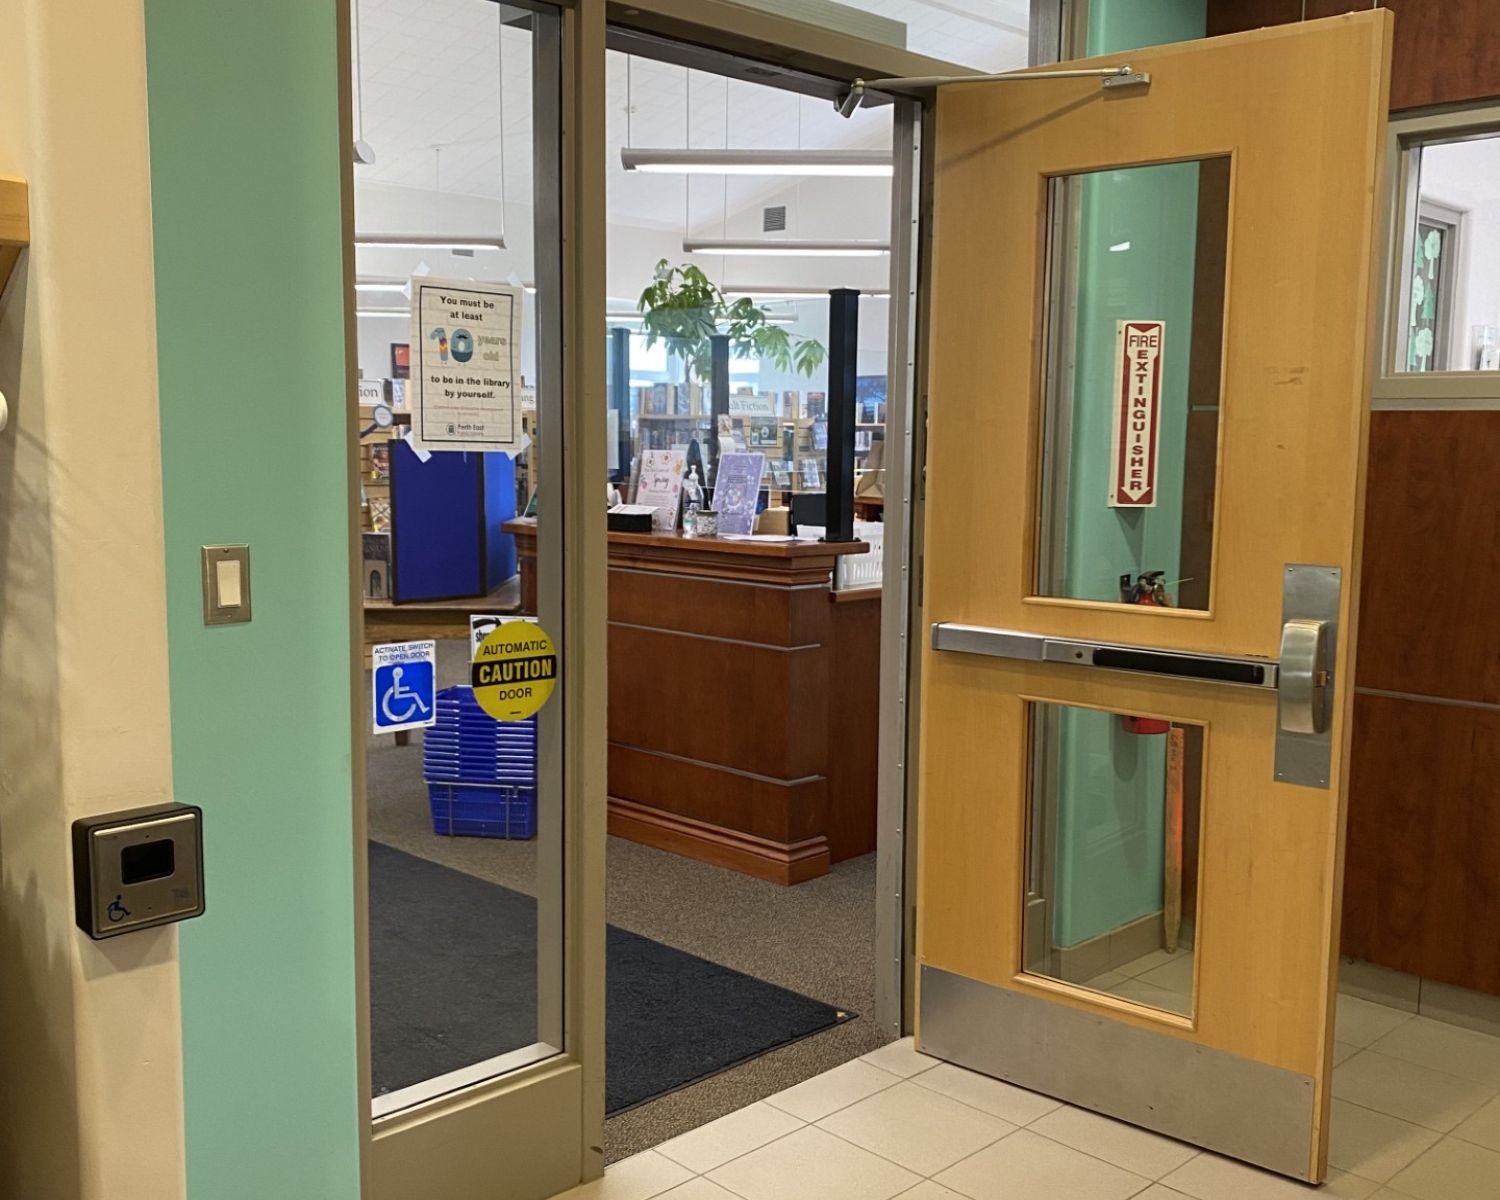 An interior door in the library is open, welcoming you into PEPL